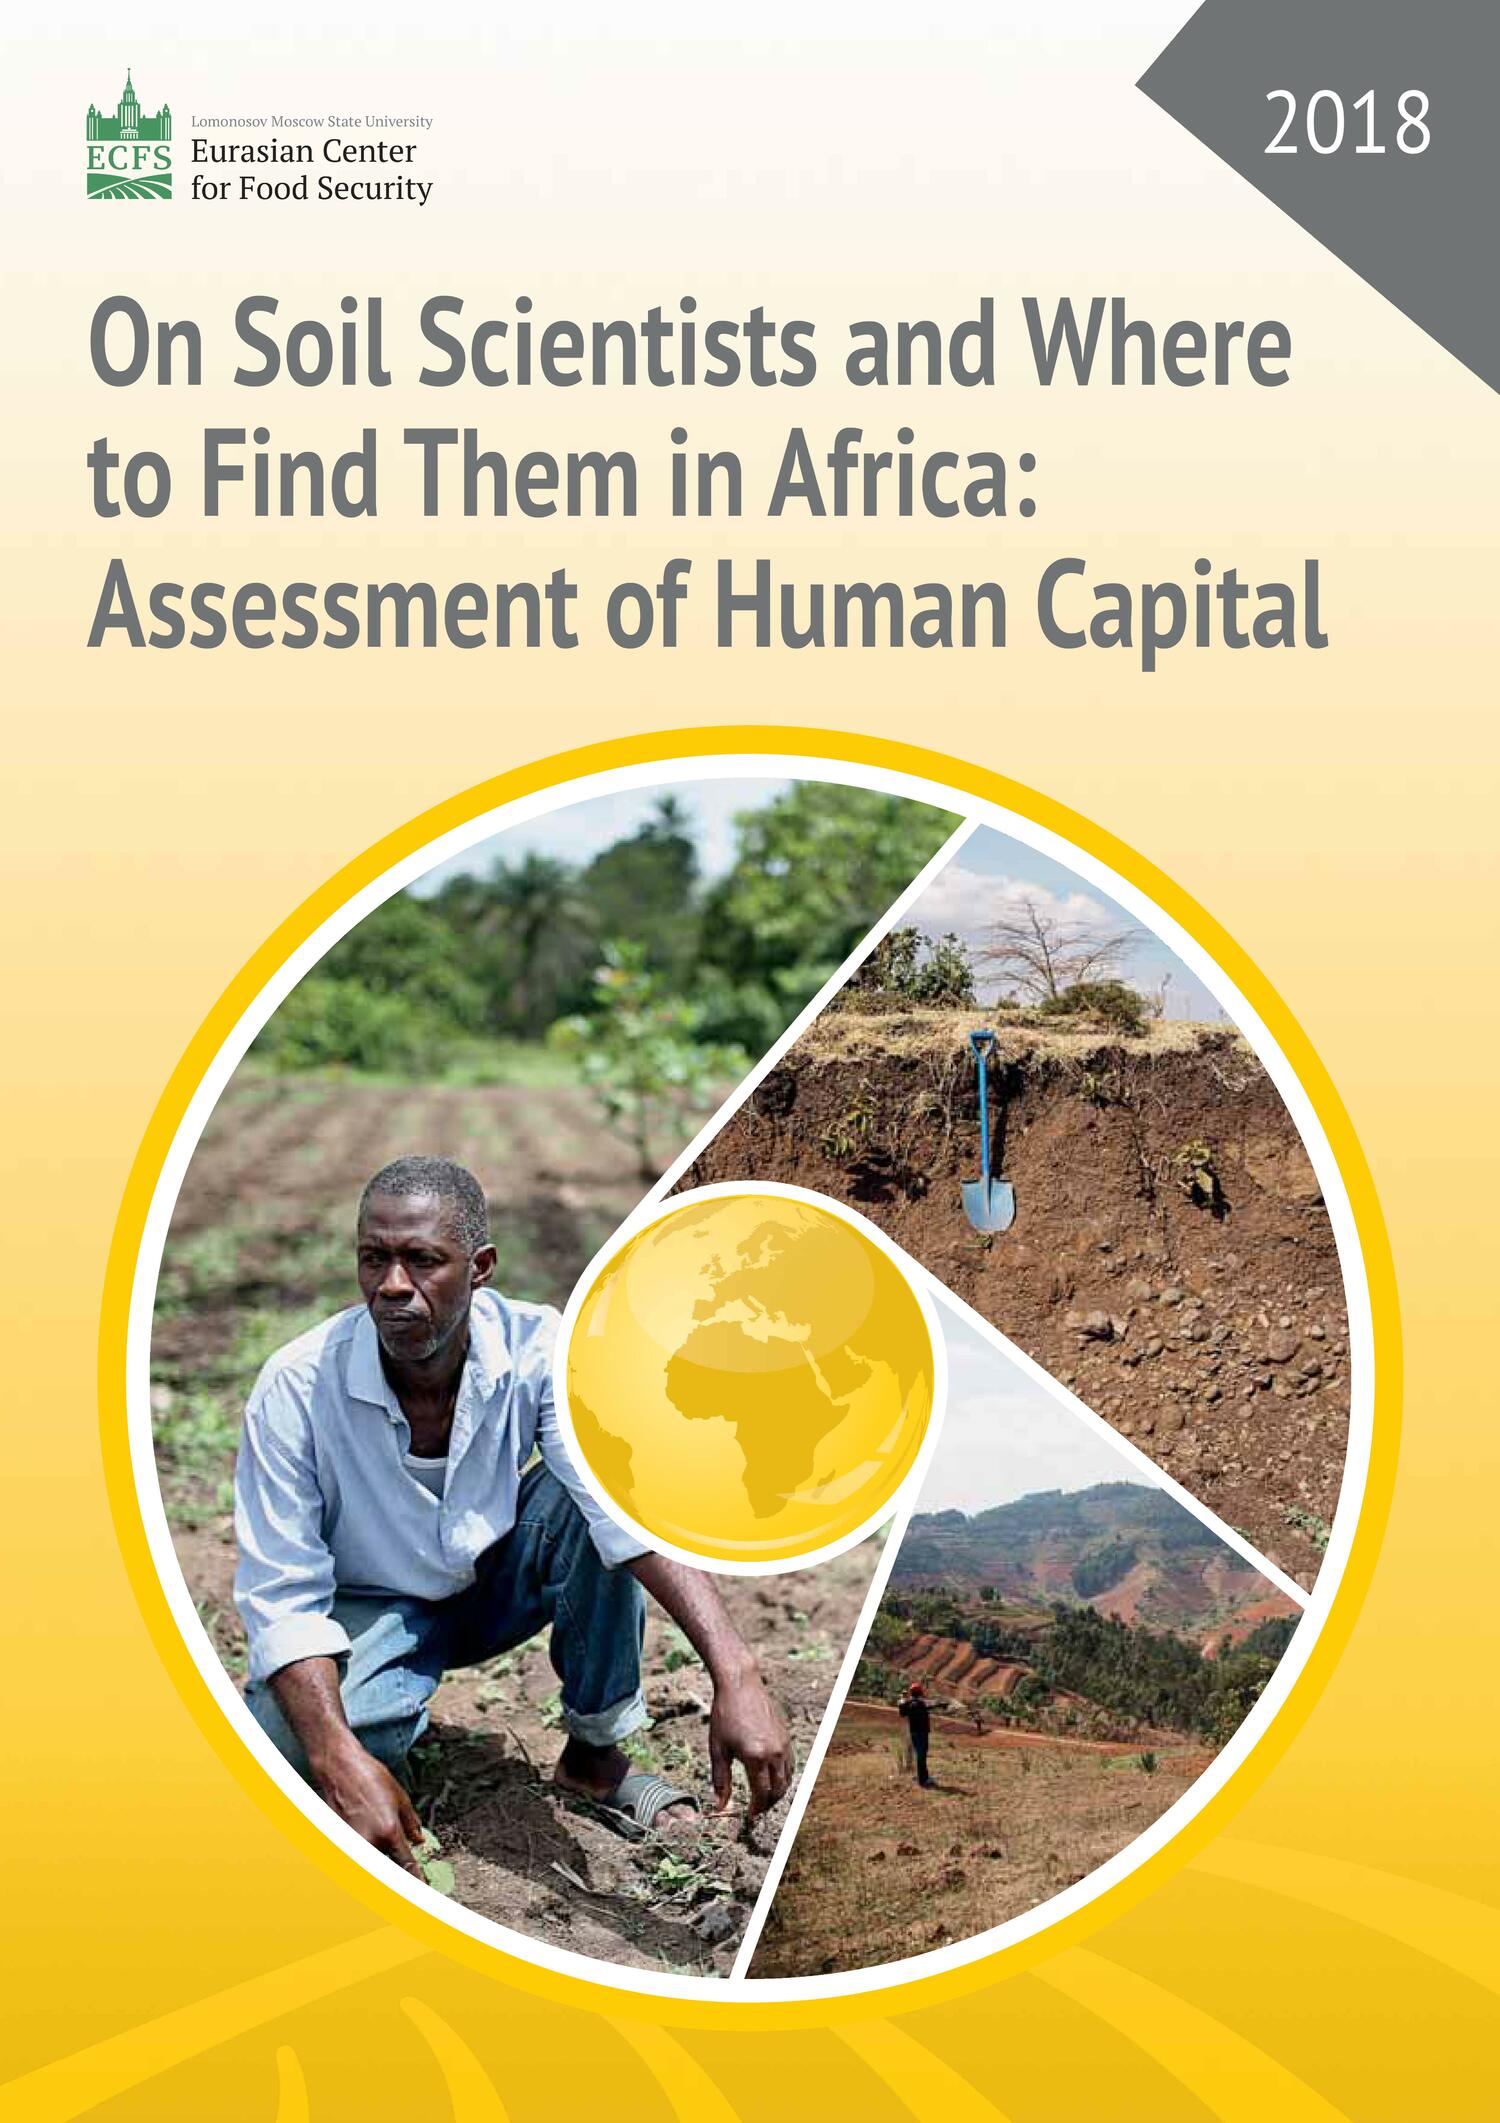 Human Capital in Soil Science in Africa, Central Asia, and the South Caucasus